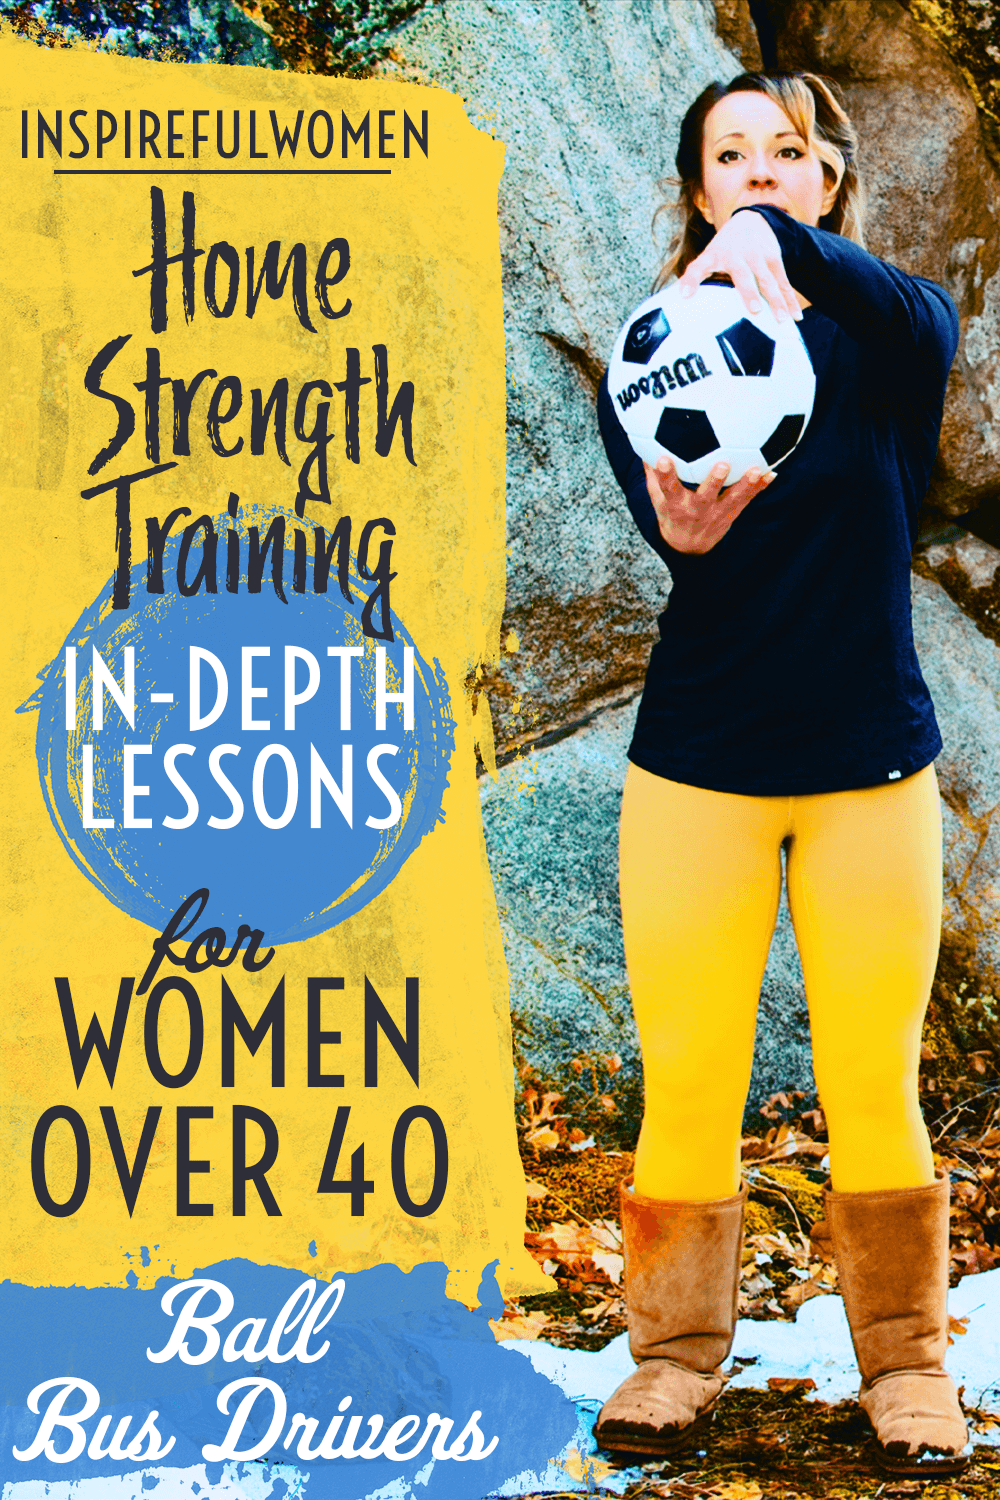 bus-drivers-ball-rotator-cuff-deltoid-exercise-at-home-women-40-plus